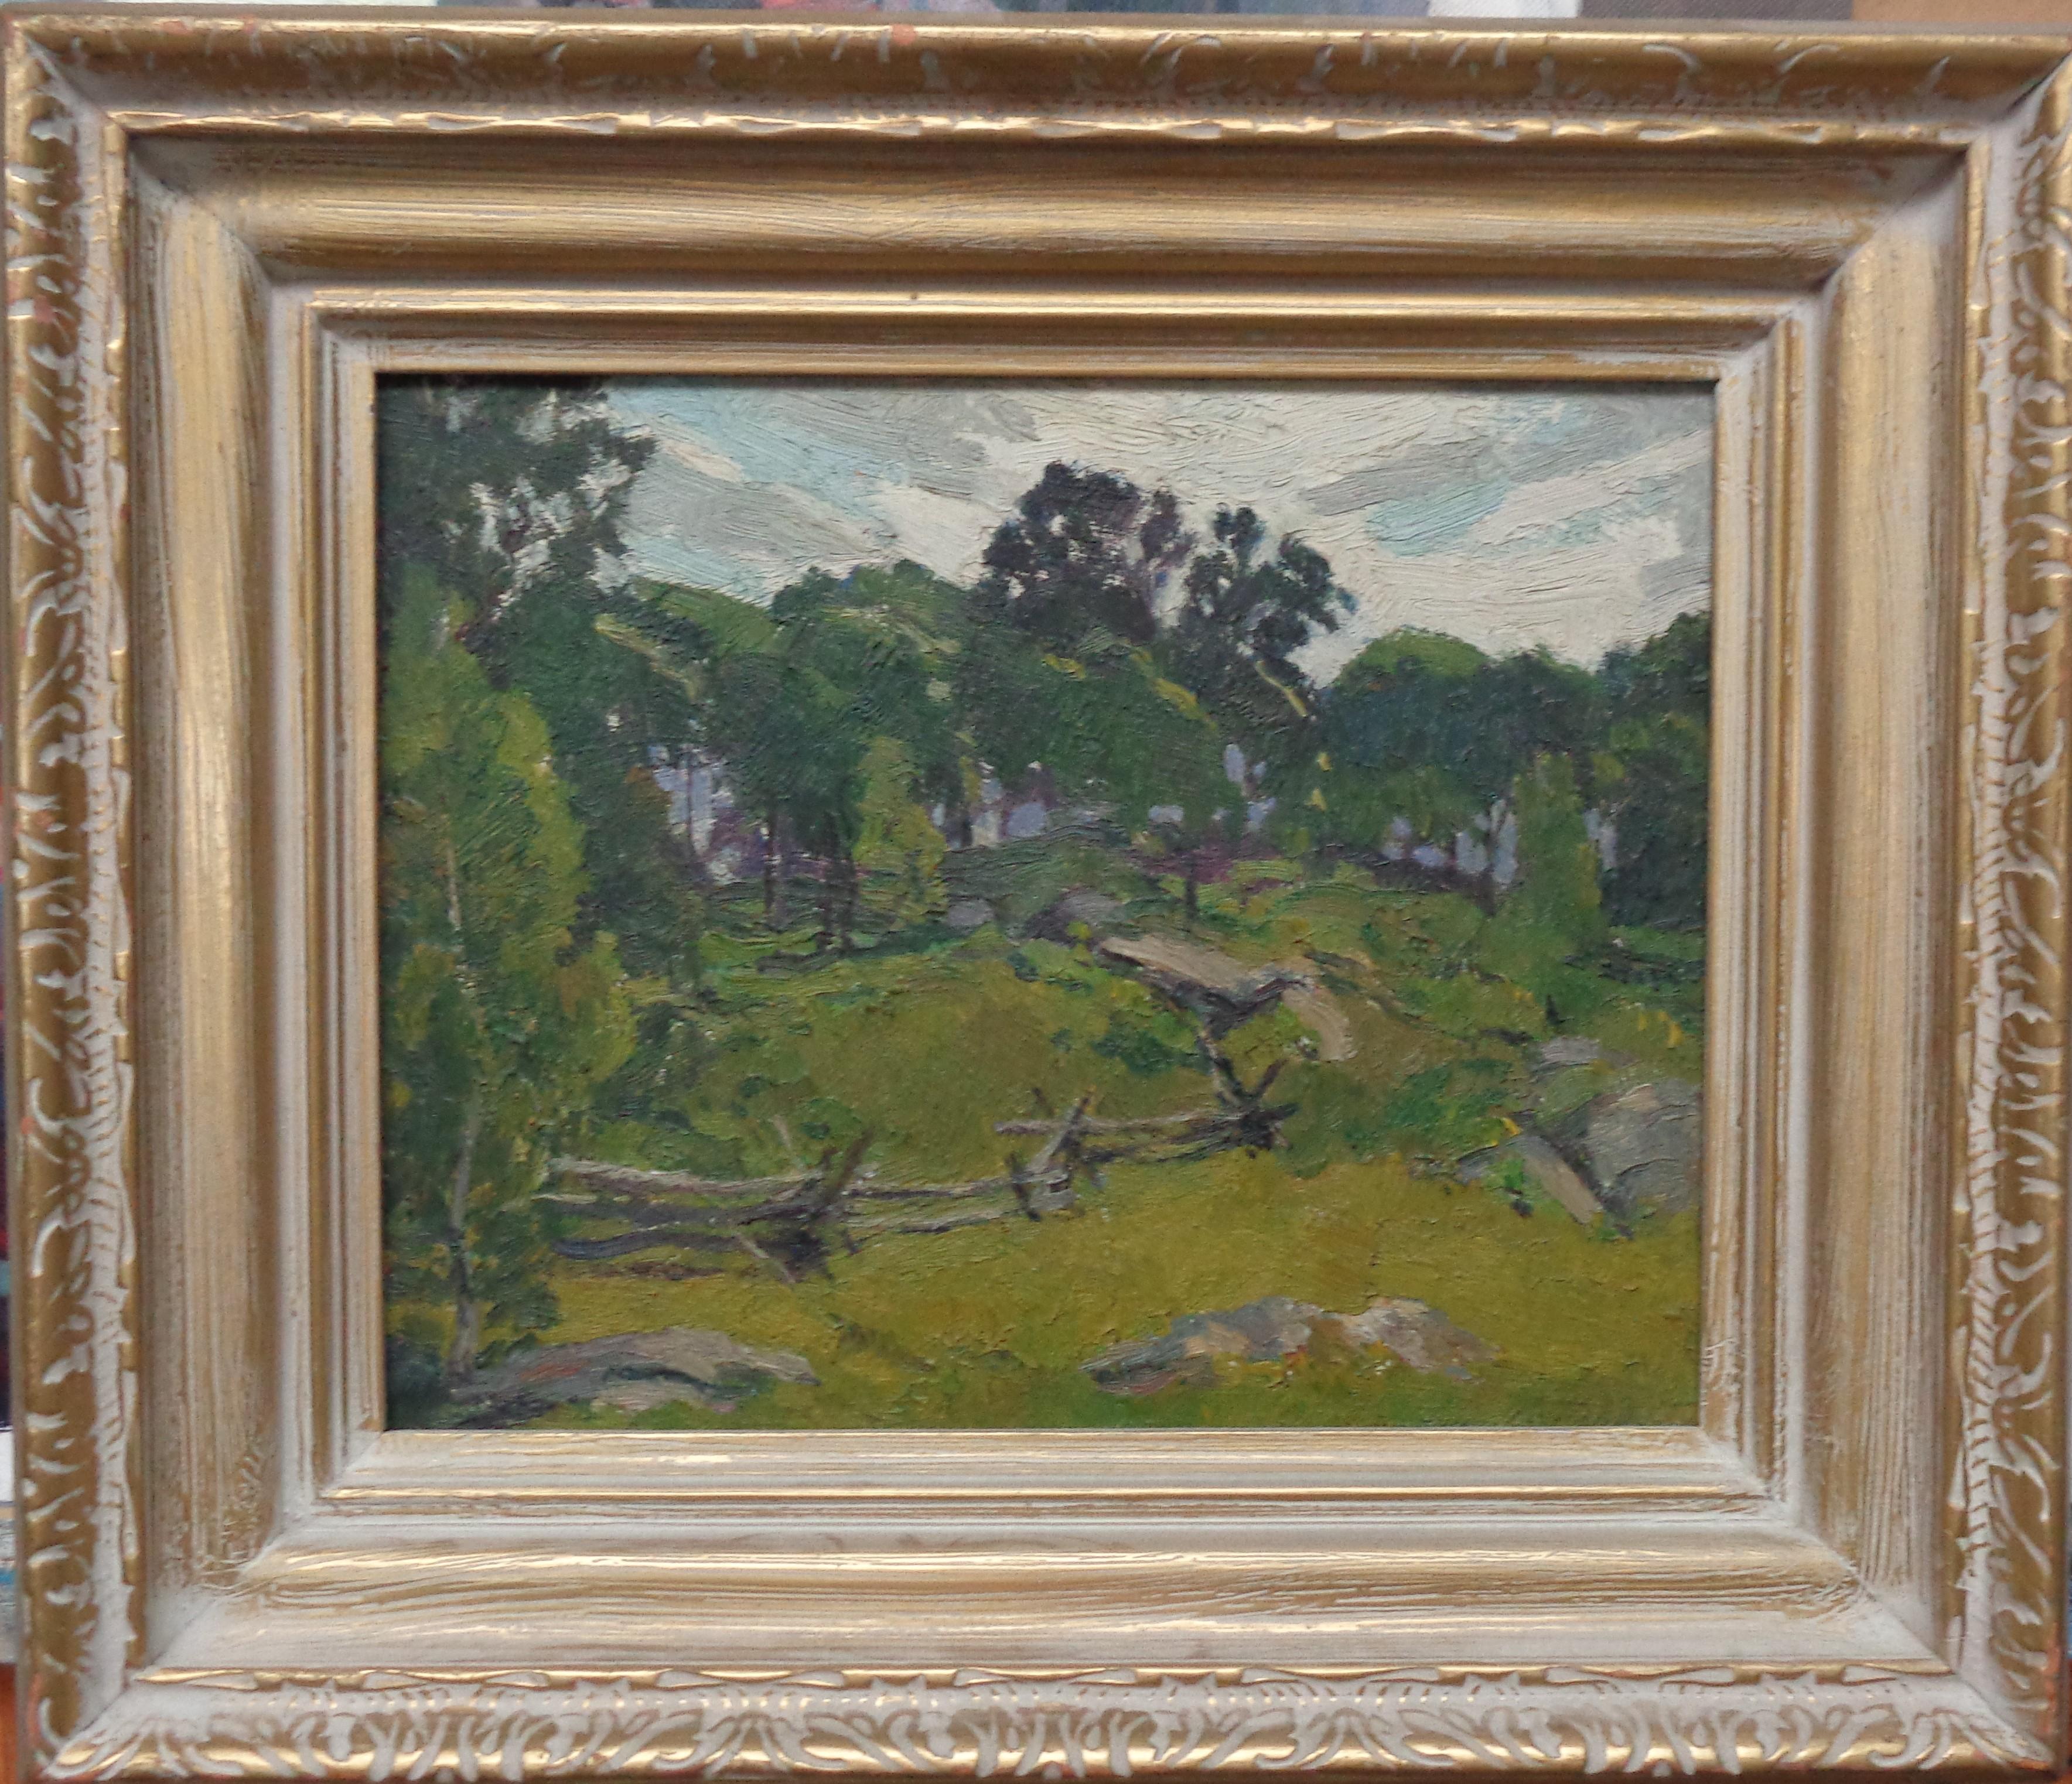 James Goodwin McManus (American  1882-1958) CT
oil/panel
Summer landscape with split rails 
signed LR
dated June 22, 1934 verso
8 x 10 image
Biography:
James Goodwin McManus was a noted American painter and considered one of the deans of Connecticut